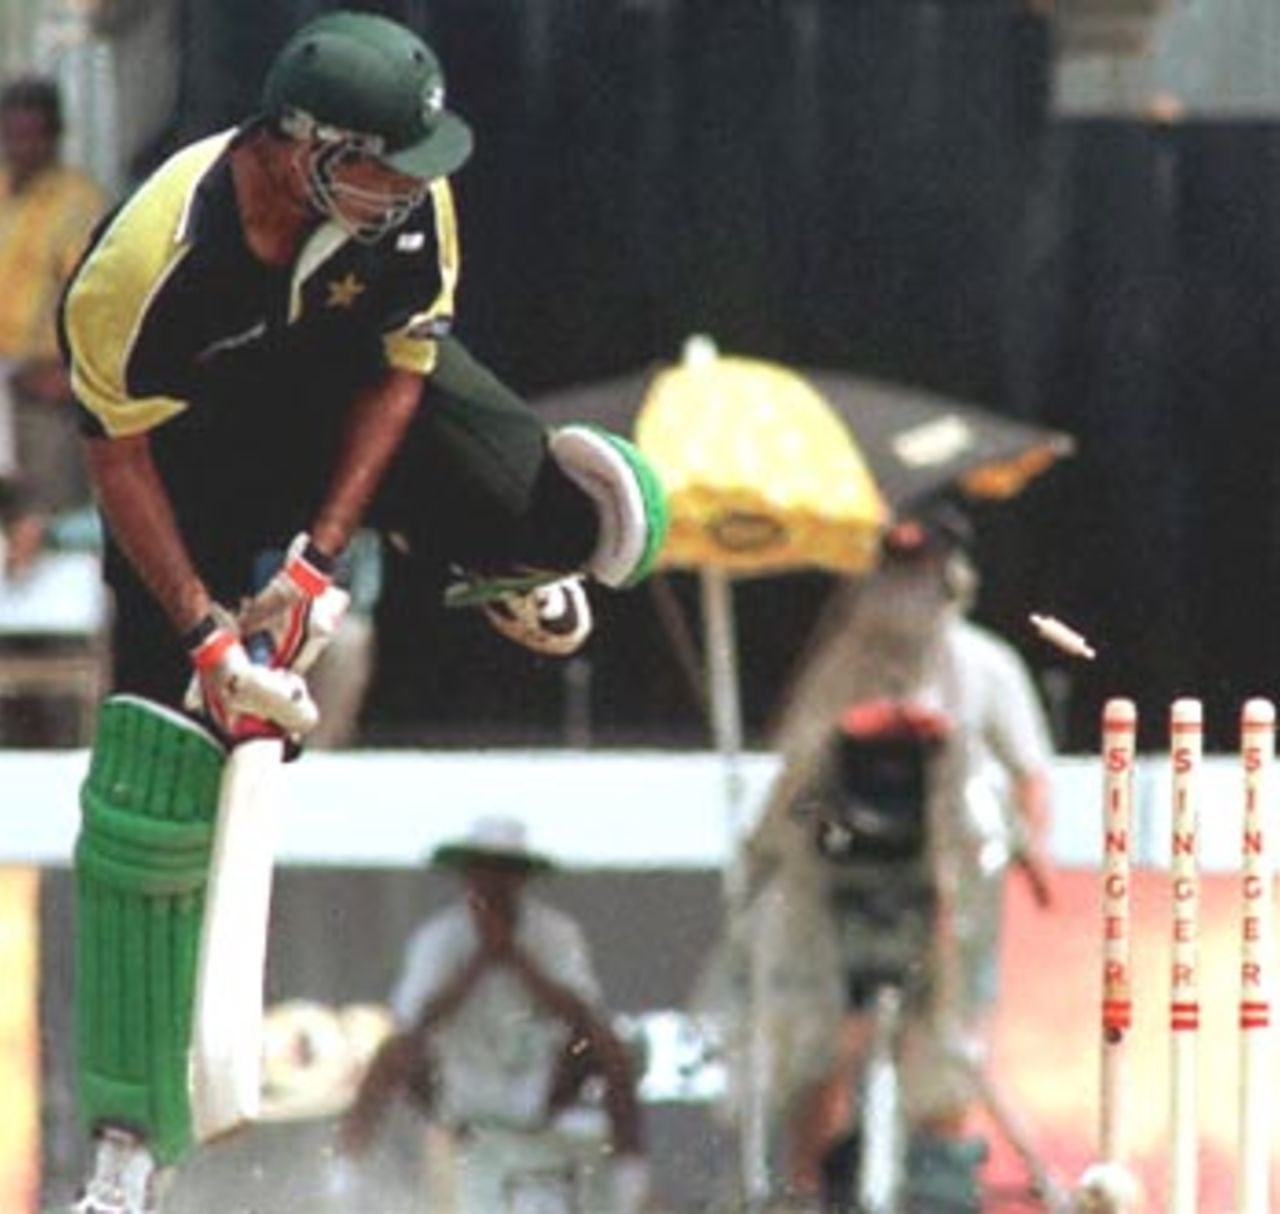 Pakistani batsman Waqar Younis looks back as his stumps are shattered by Sri Lankan bowler Nuwan Zoysa during the first Singer Triangular ODI match in Galle, Sri Lanka 05 July 2000. Pakistan made 164 runs for eight wickets in 45 overs.